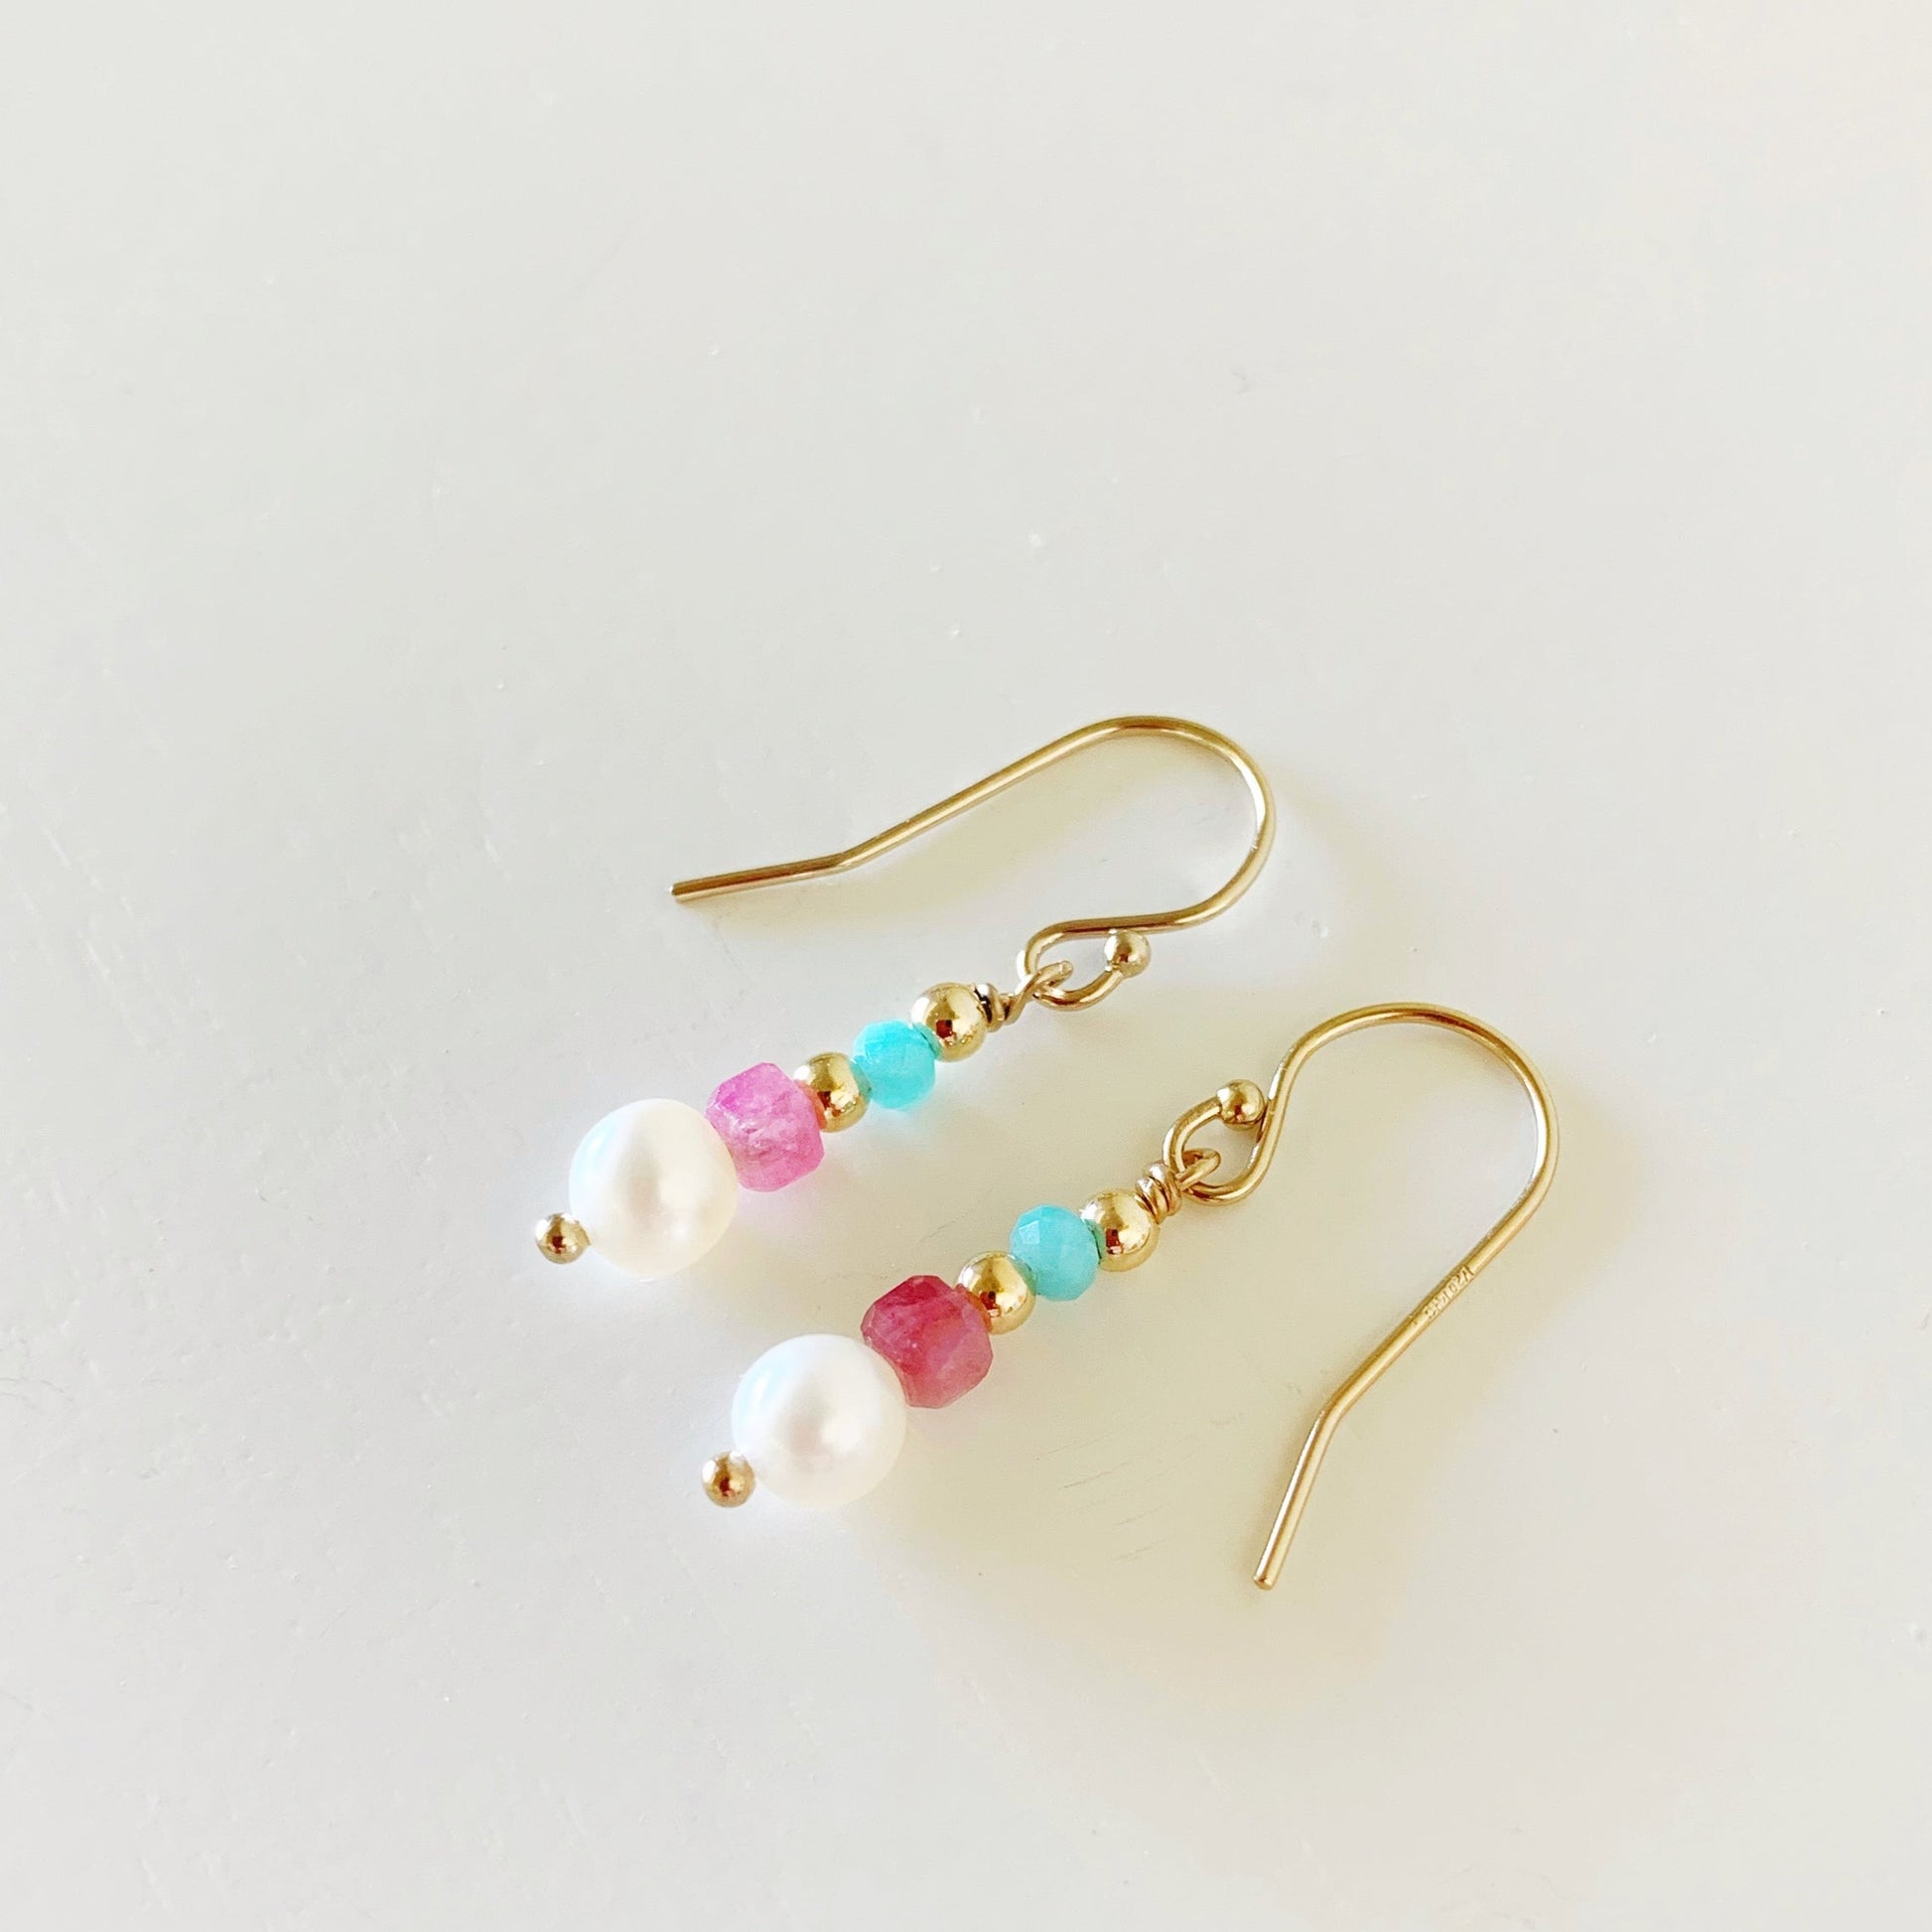 the harwich port earrings by mermaids and madeleines are created with 14k gold filled beads and findings, with freshwater pearls, faceted pink tourmaline beads and bright amazonite rondelles. these earrings are a petite linear style. the earrings are pointing to the left and photographed flat on a white surface